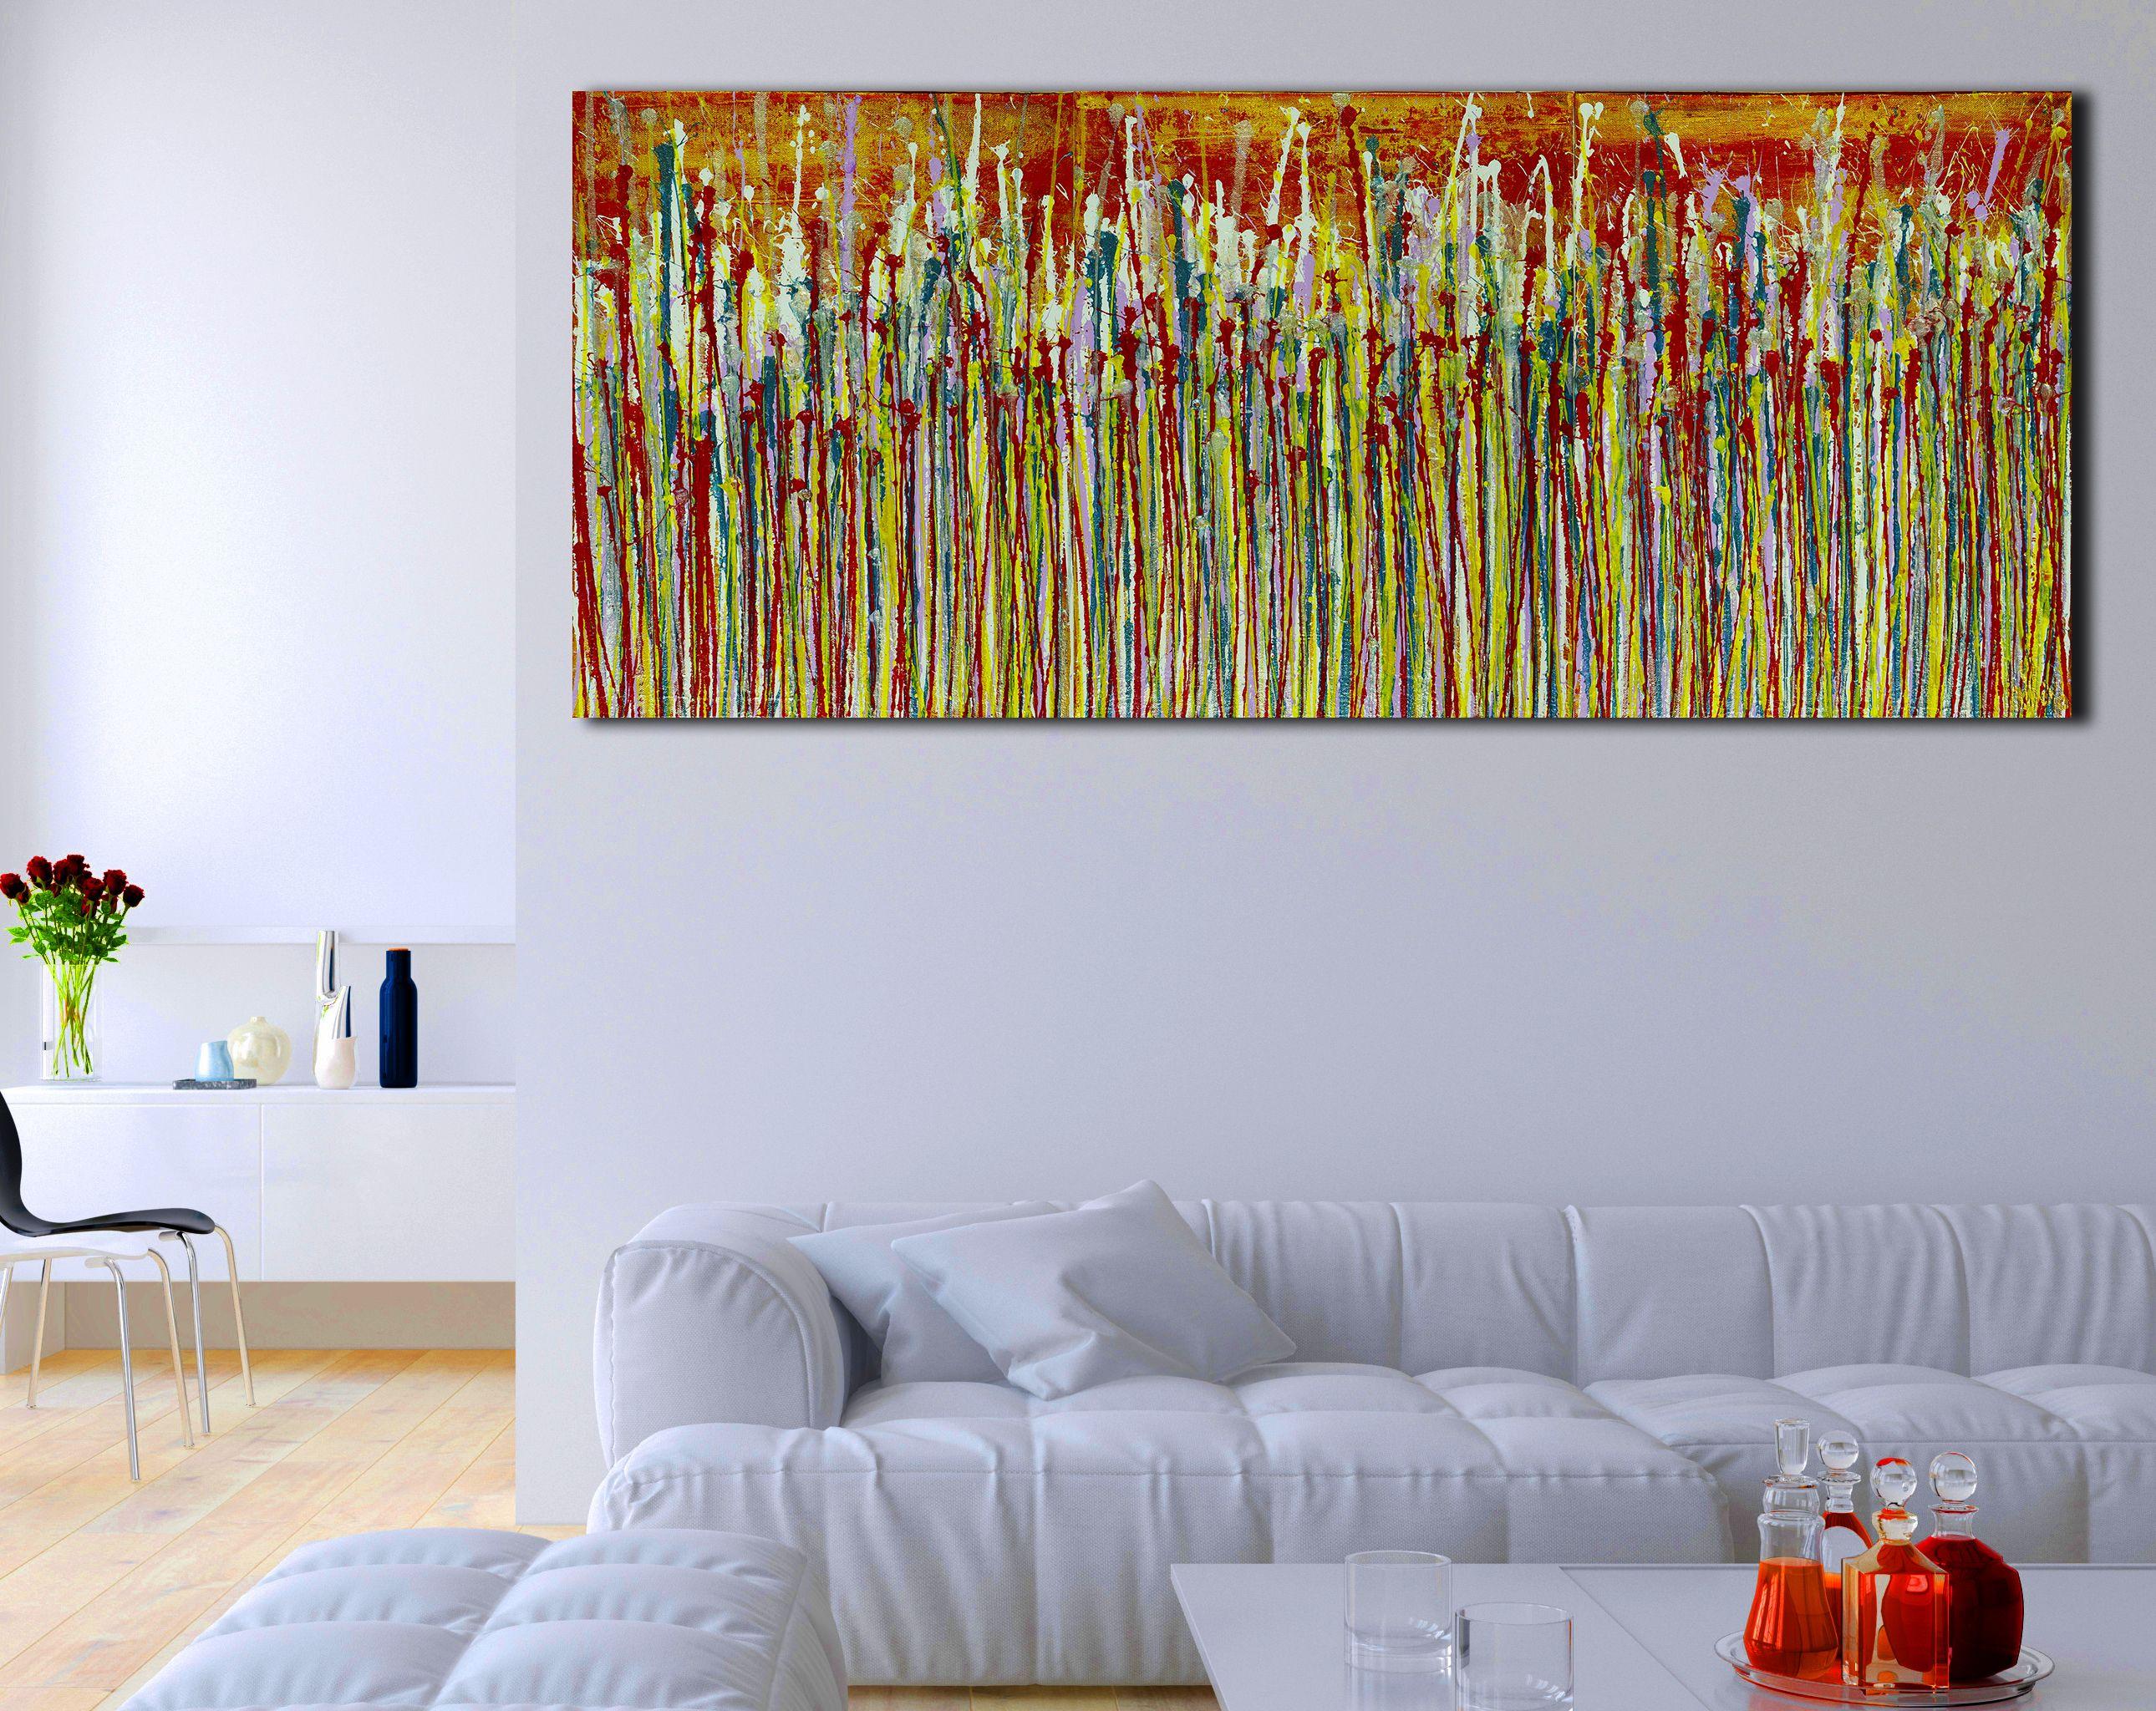 Three canvases16 W x 20 H x 0.7 in each.    Expressive modern abstract, bold full of life, gloss and shimmer! inspired by nature, many colors combined with mica particles. Yellow, gold, blue, magenta, purple and clear paint over red and gold. Ready